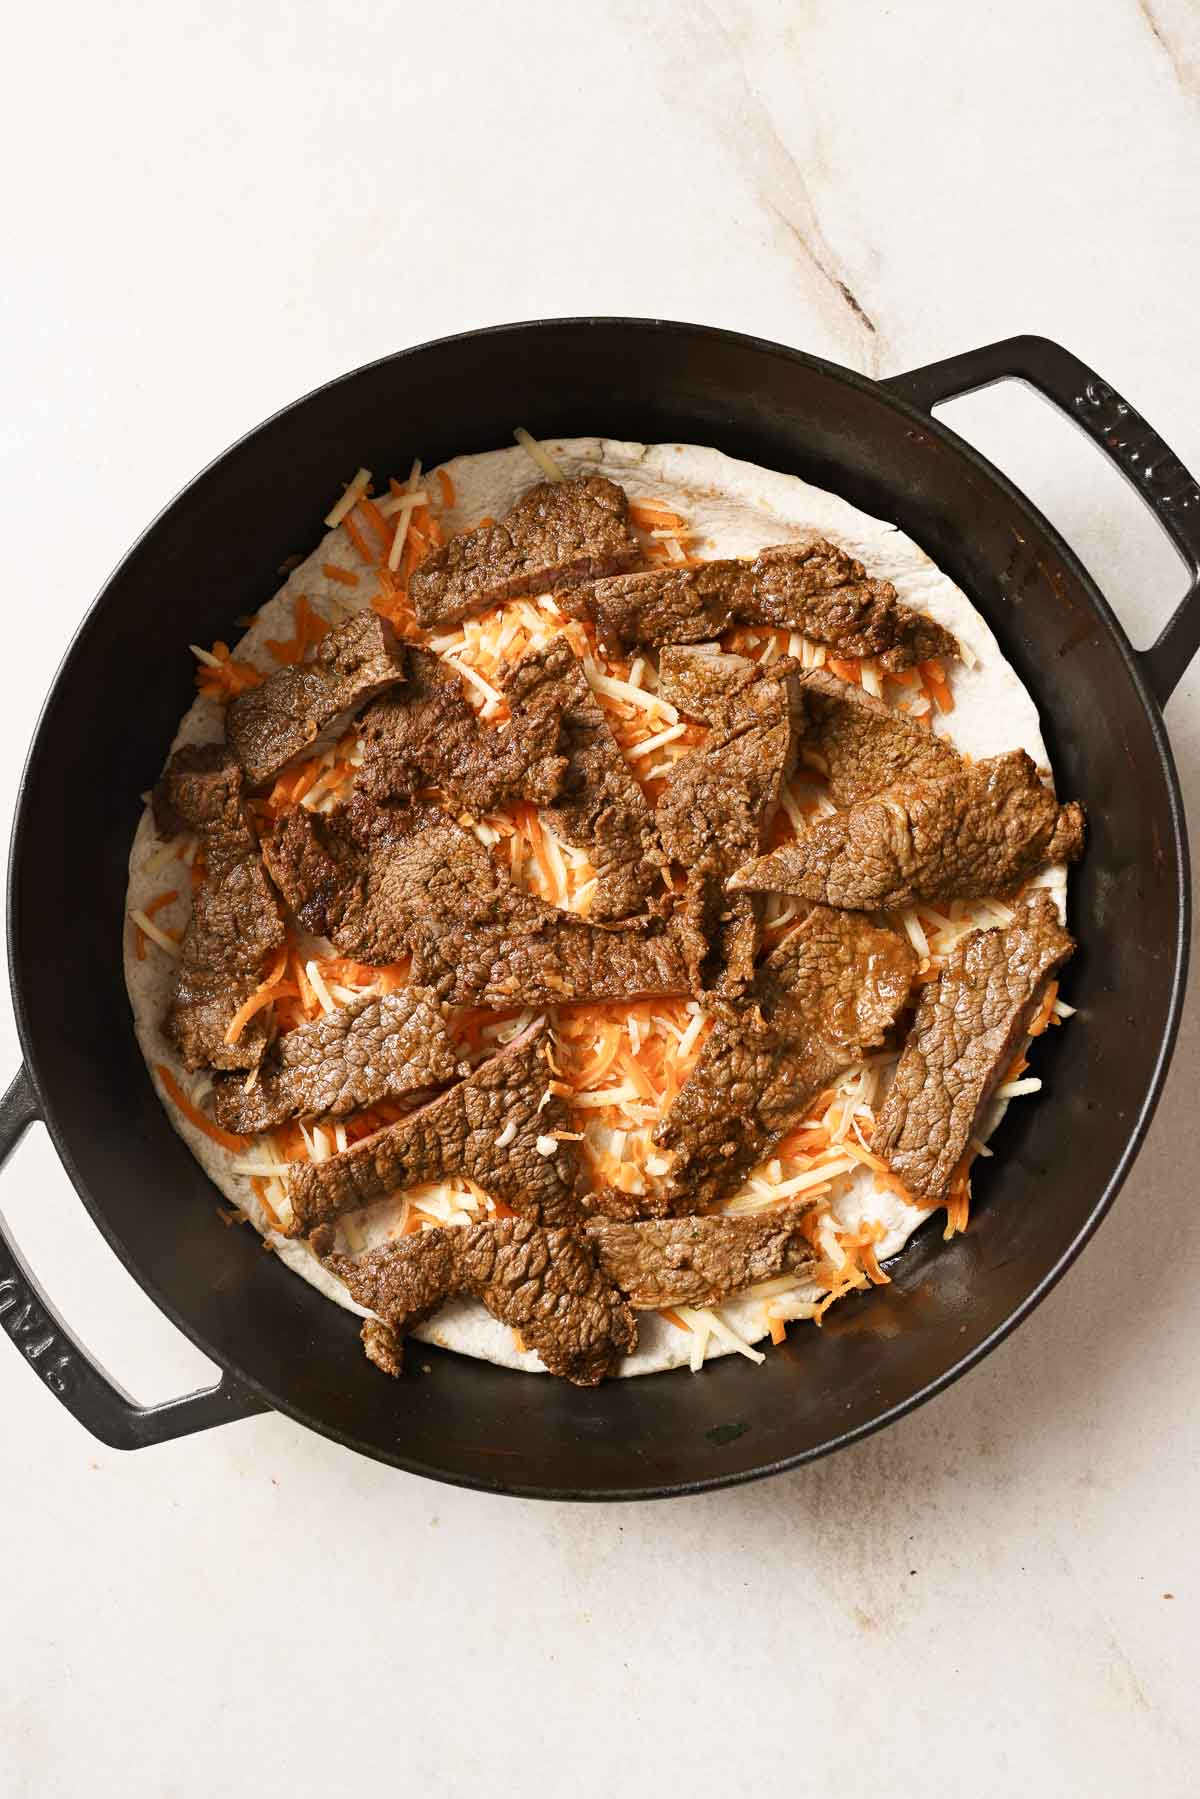 A skillet with a tortilla, cheese, and sliced carne asada.